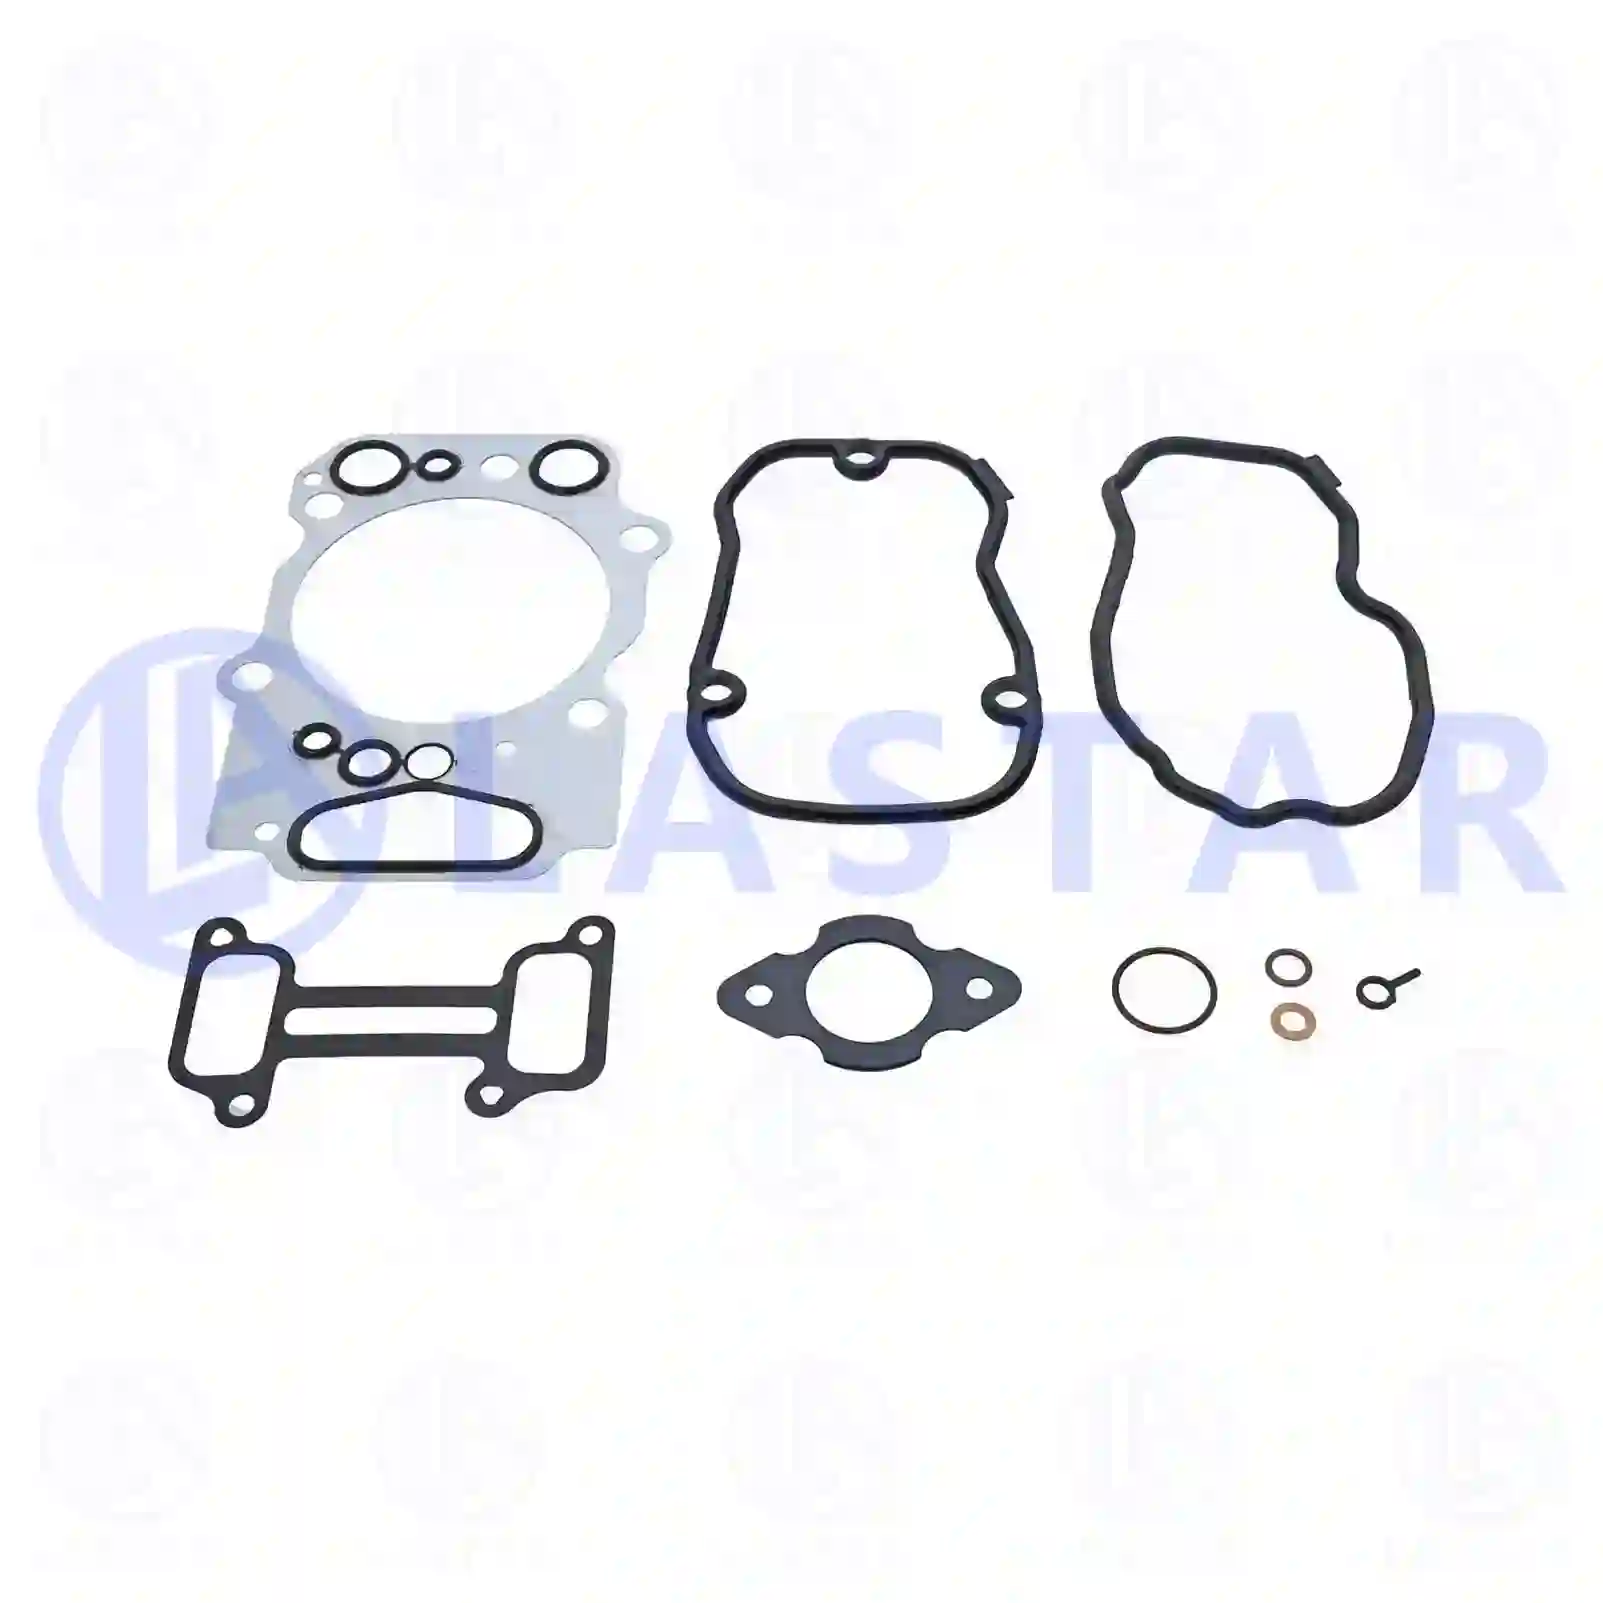 Cylinder head gasket kit, new version, 77704784, 2308201 ||  77704784 Lastar Spare Part | Truck Spare Parts, Auotomotive Spare Parts Cylinder head gasket kit, new version, 77704784, 2308201 ||  77704784 Lastar Spare Part | Truck Spare Parts, Auotomotive Spare Parts